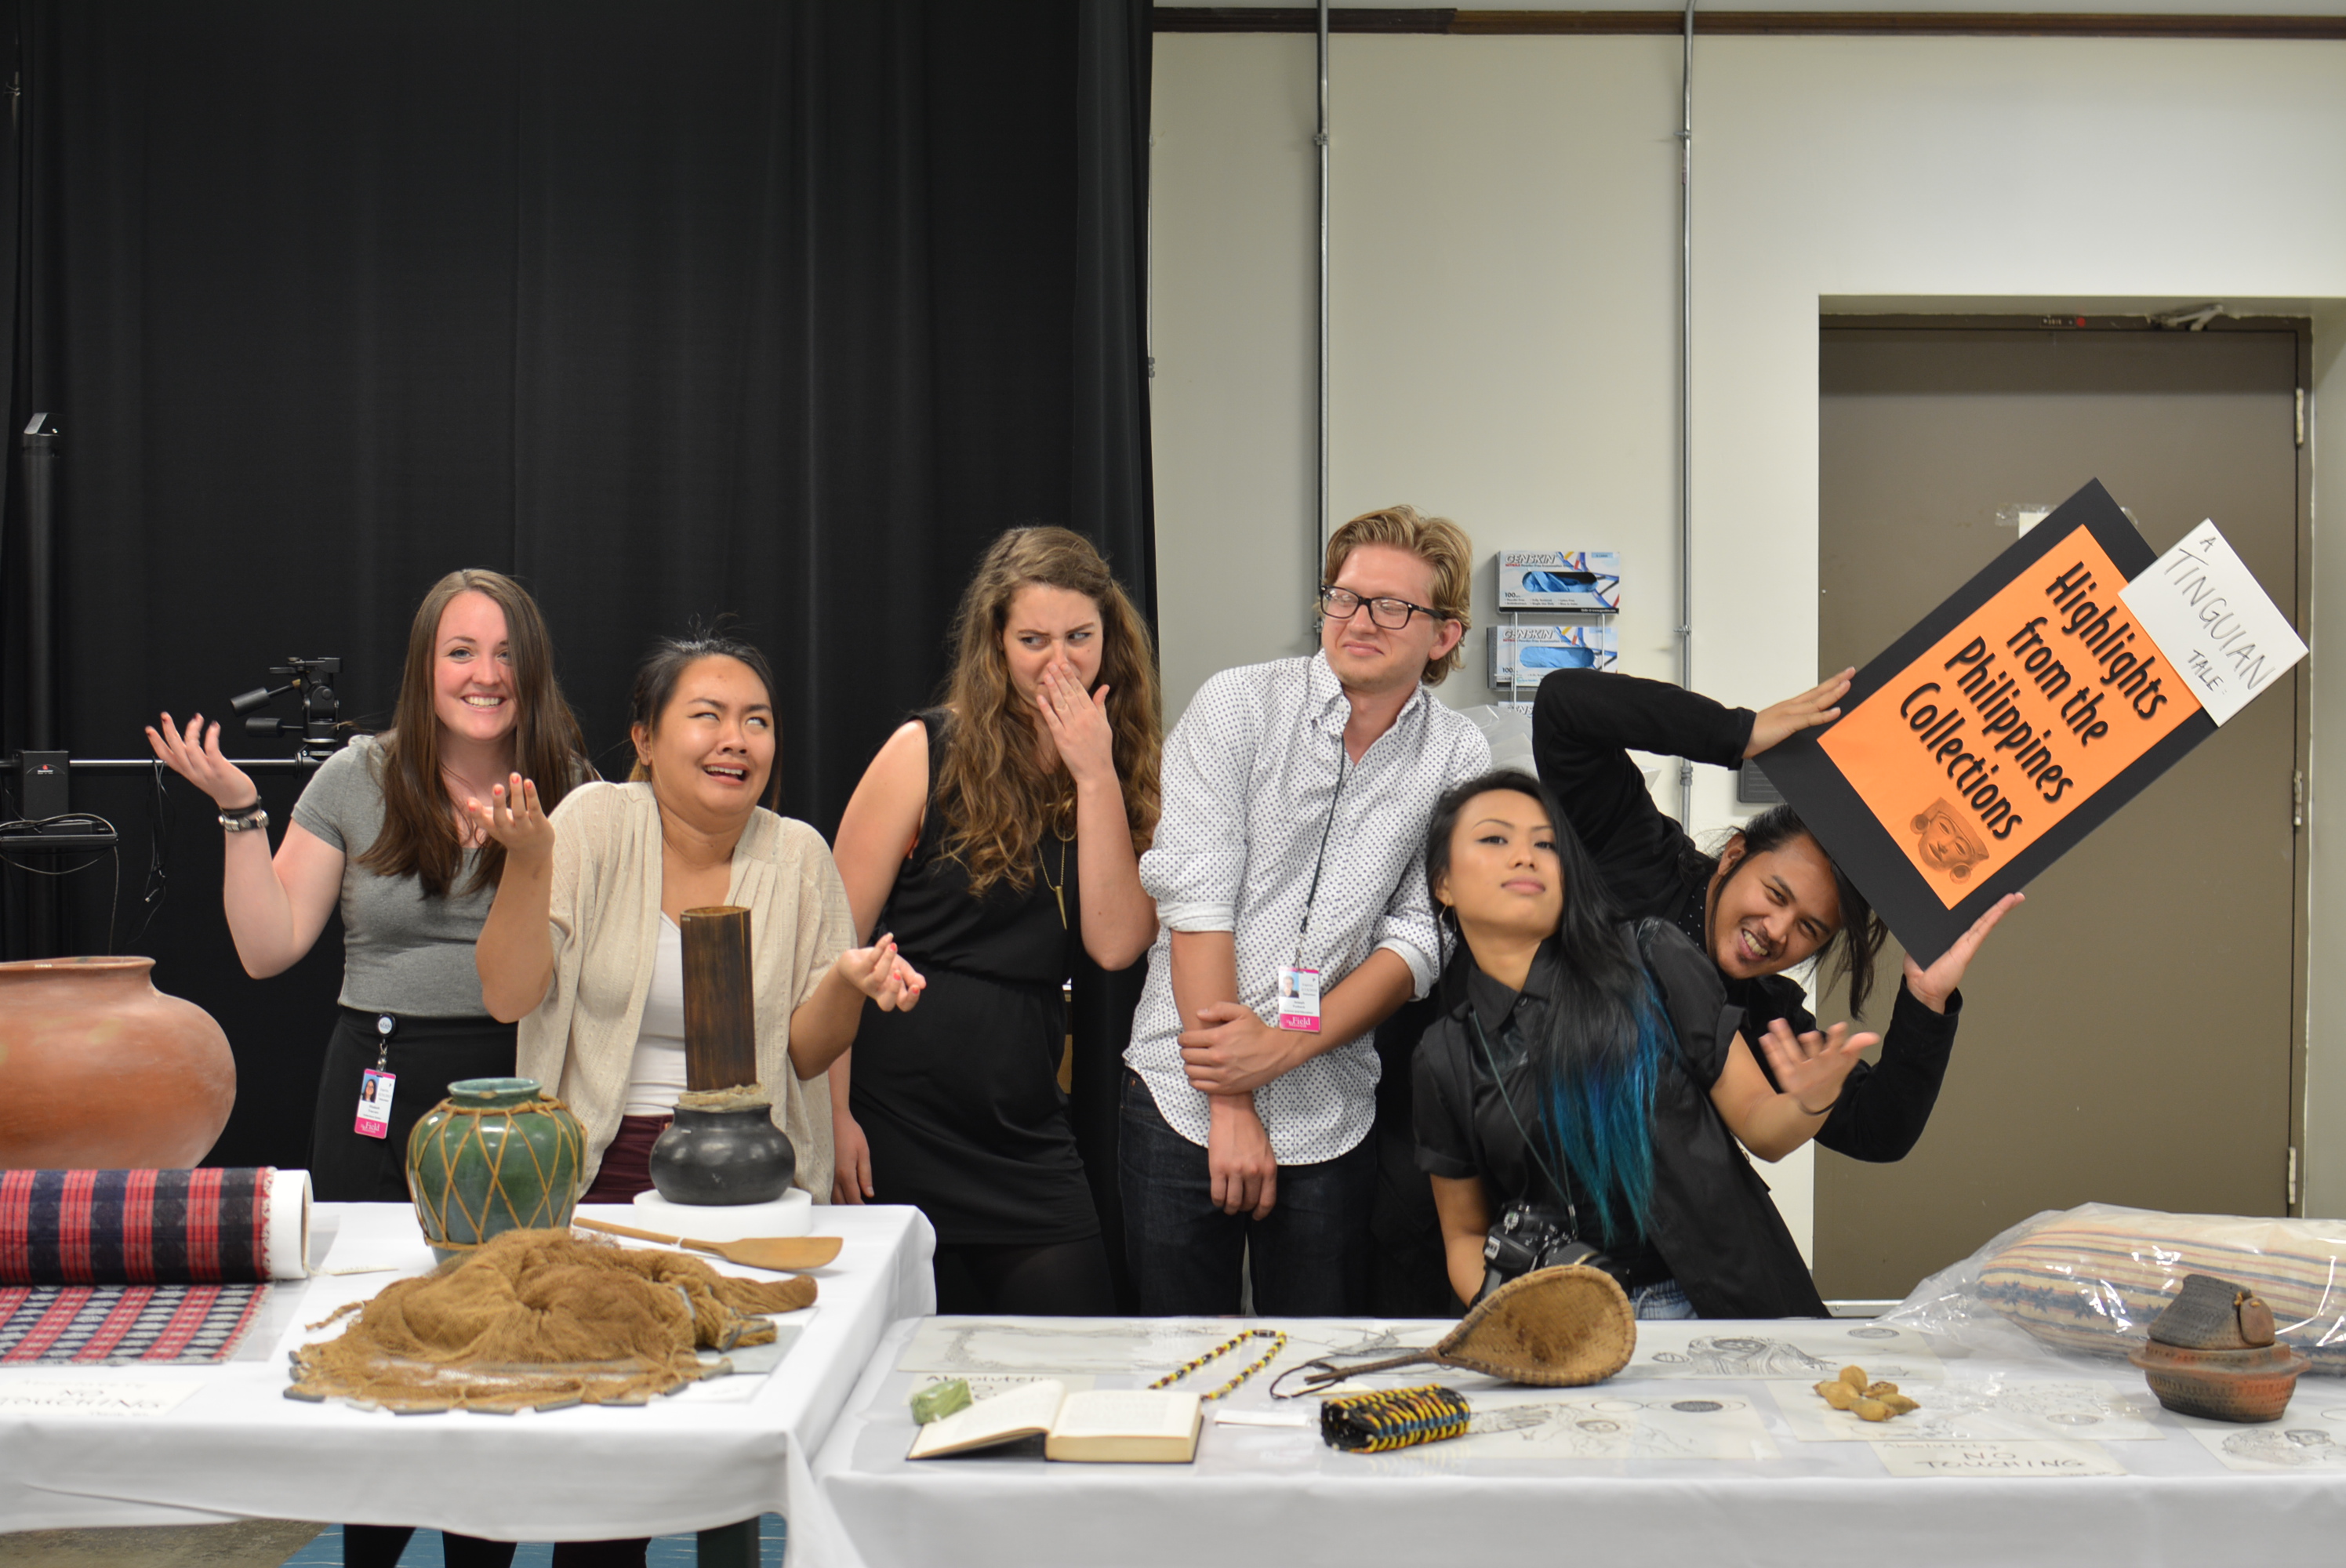 The Digital Co-Curation Team poses for a silly group photo behind their display tables. (c) Field Museum of Natural History - CC BY-NC 4.0